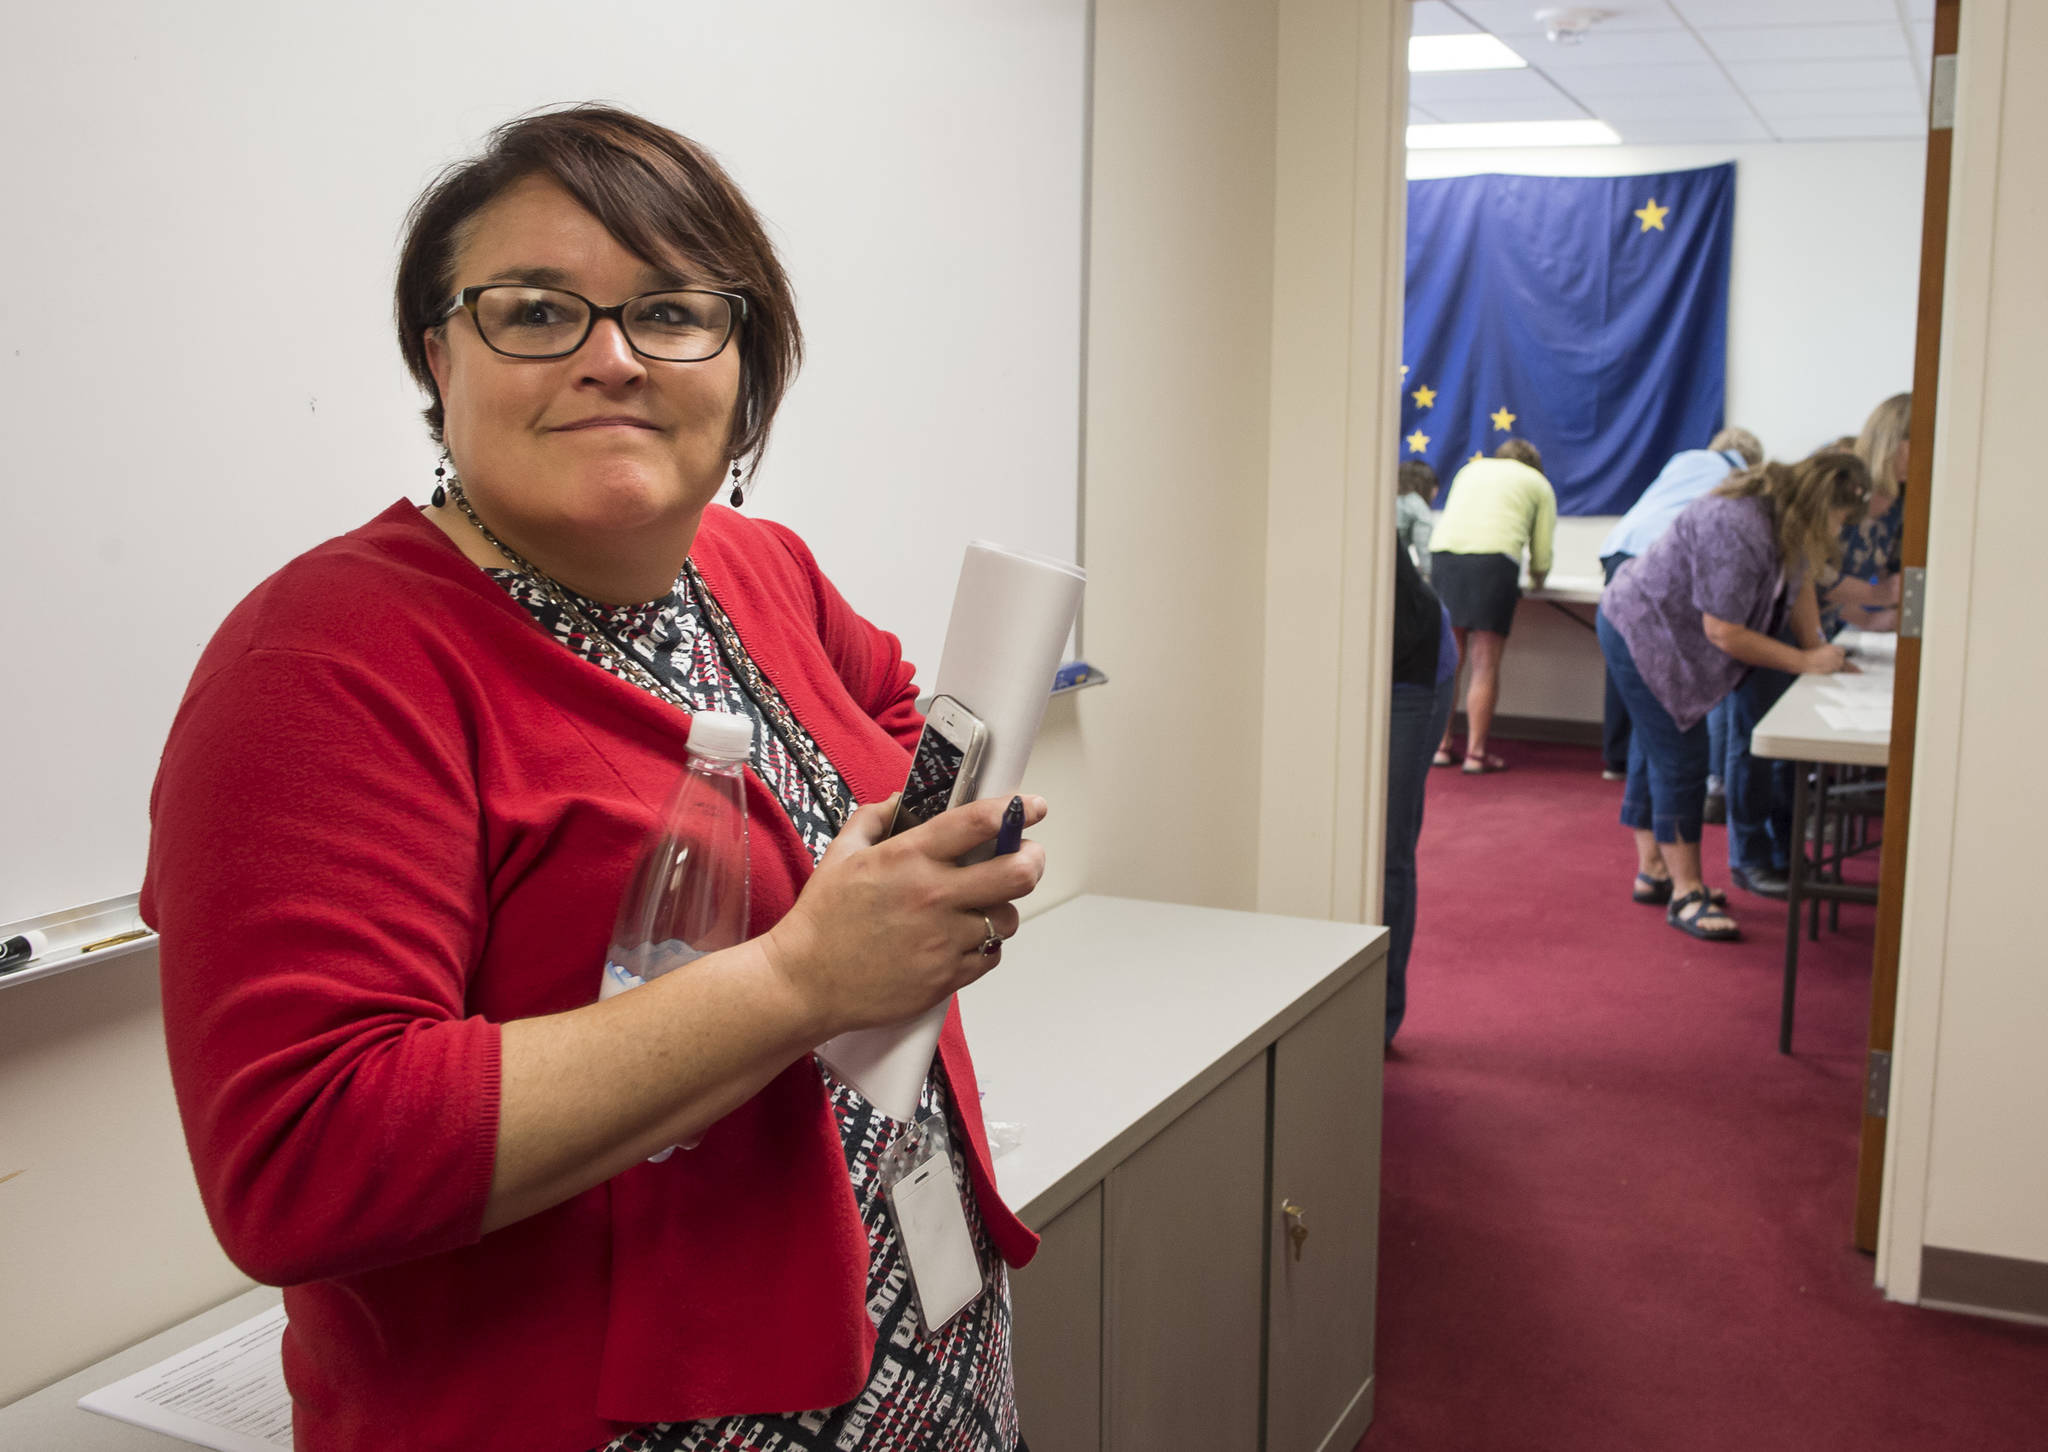 Josie Bahnke, State of Alaska’s Director of Elections, waits as Alaska Review Board members sign the final certifications of the state’s primany election at the state’s election office in downtown Juneau on Tuesday, Sept. 4, 2018. (Michael Penn | Juneau Empire)